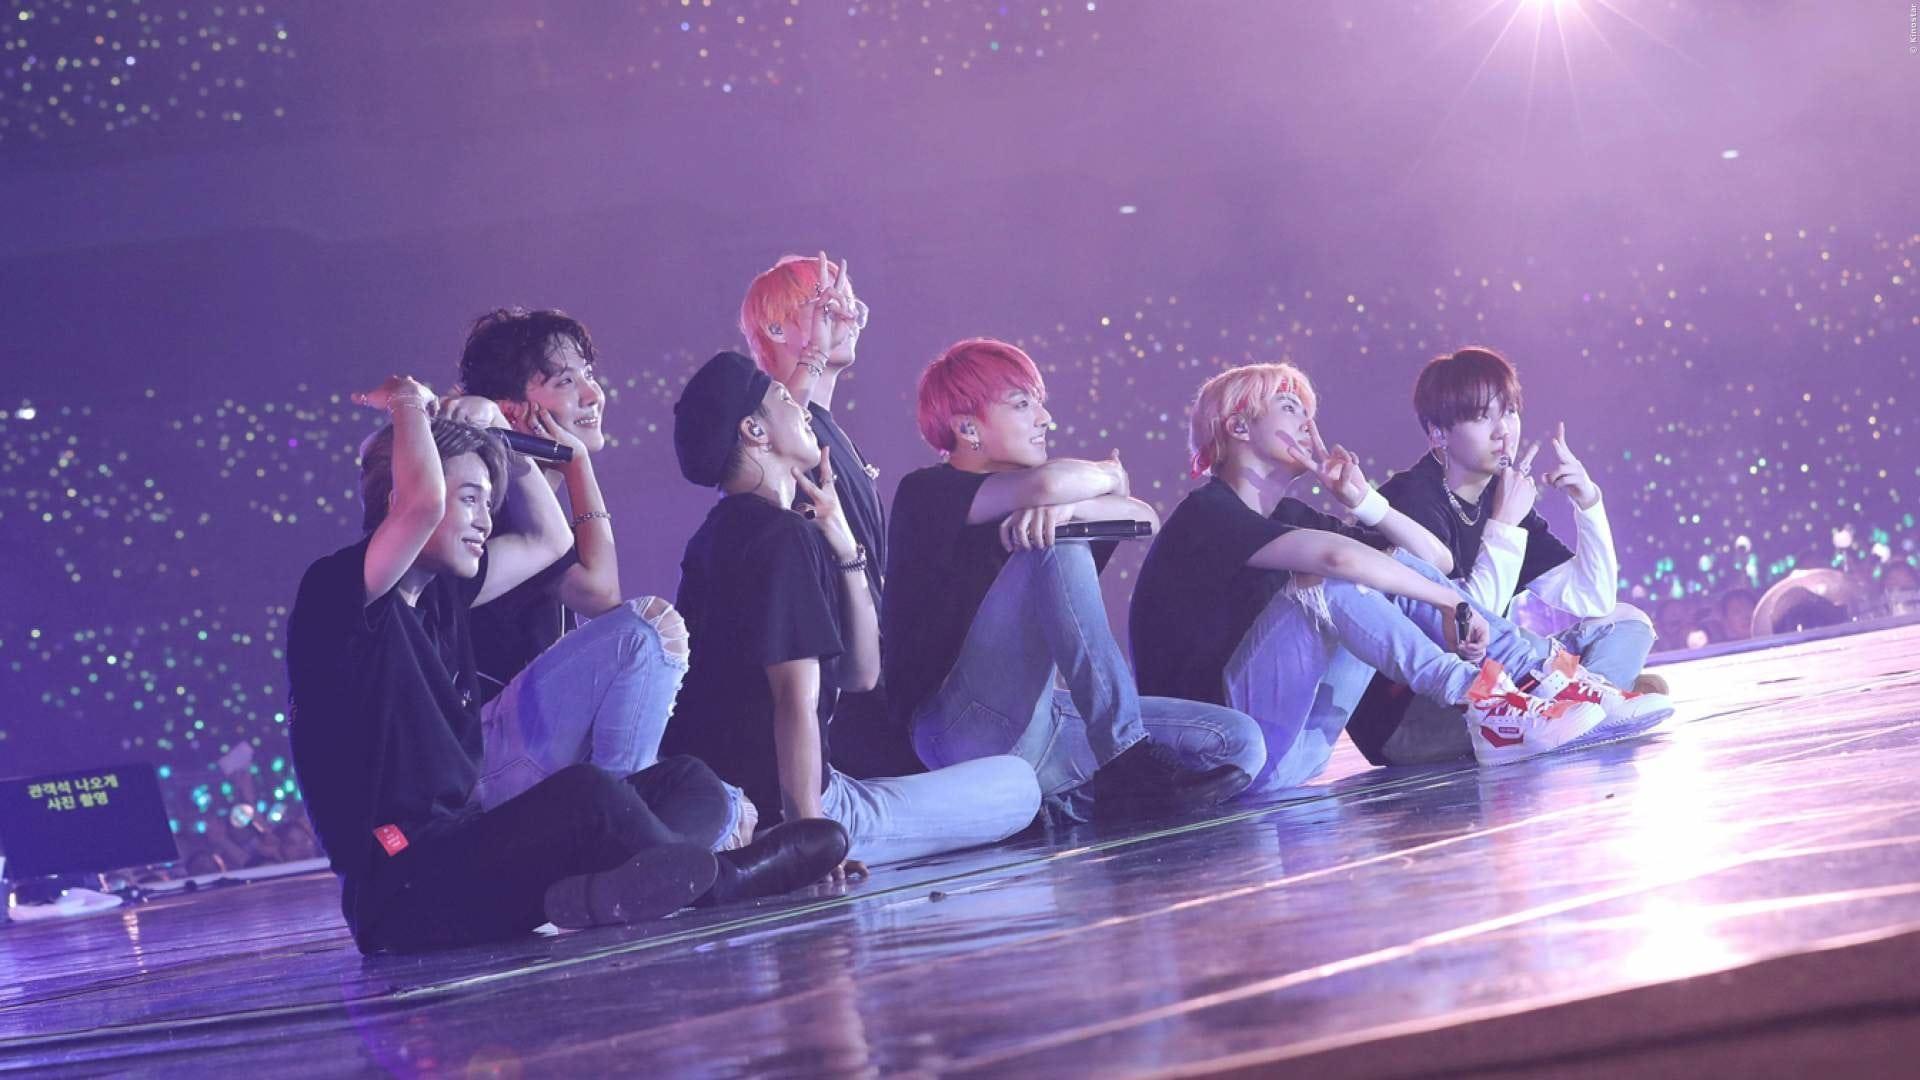 2. Taehyung's pink and blonde hair during the Love Yourself: Speak Yourself tour - wide 6